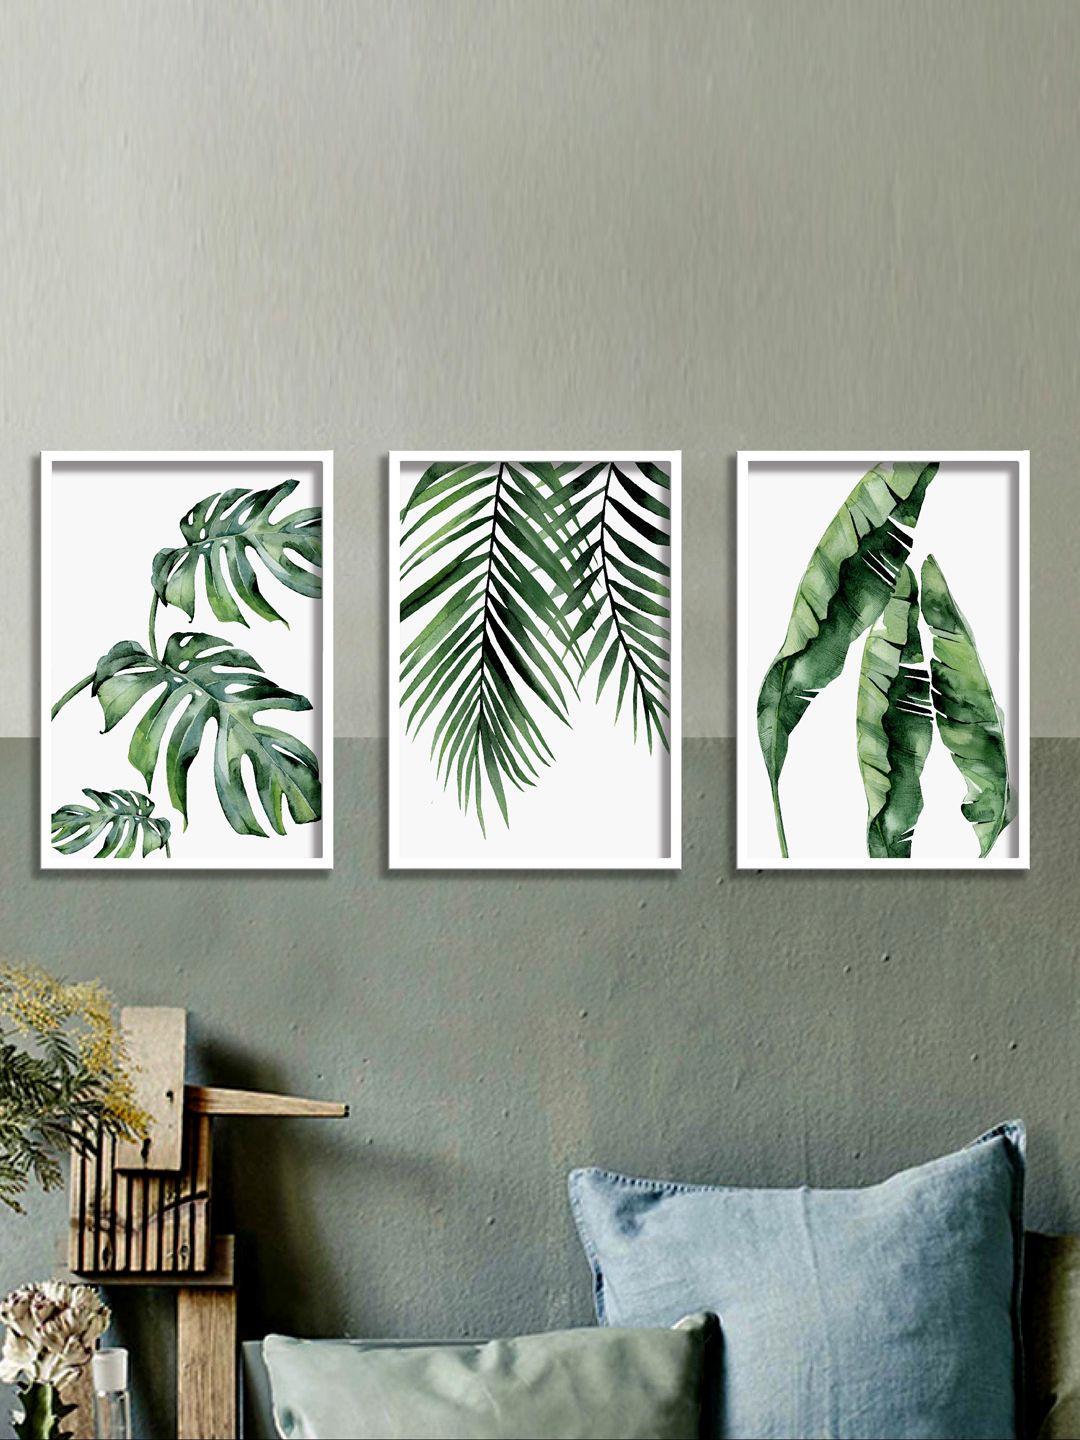 SAF Set Of 3 Green & White Textured Framed  Wall Painting Price in India